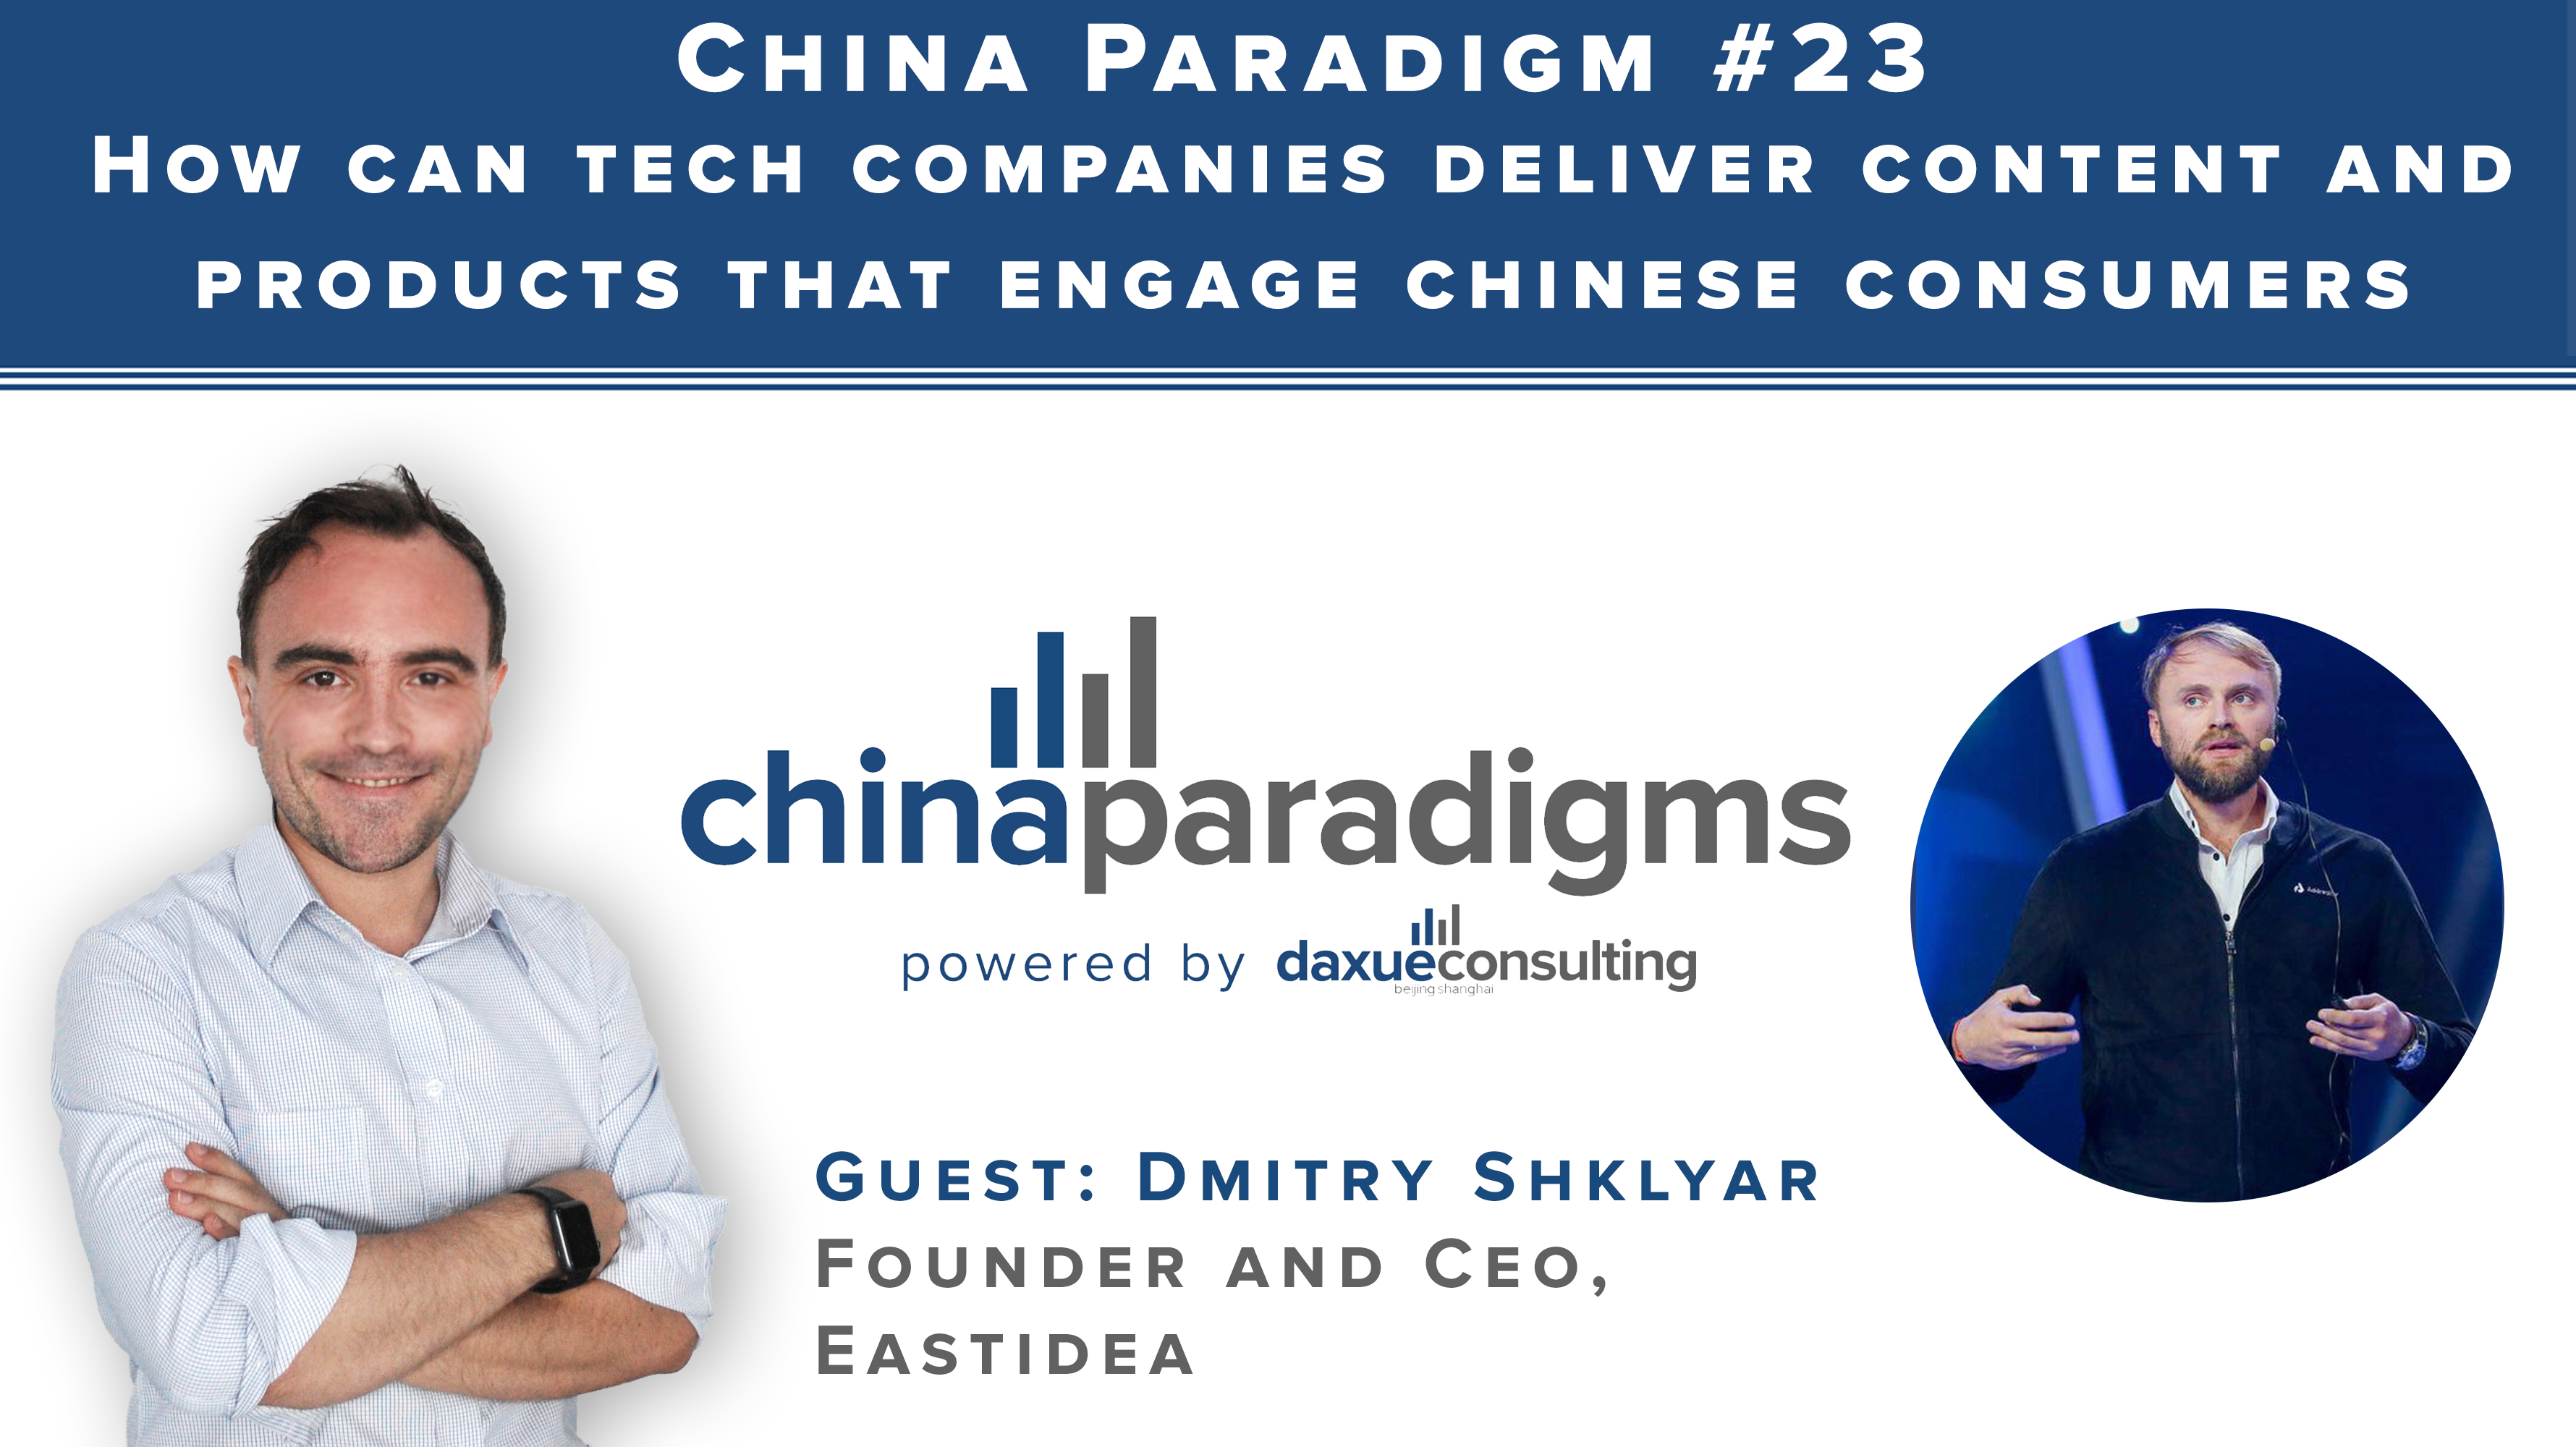 [Podcast] China paradigm #23: How tech companies can engage consumers in China